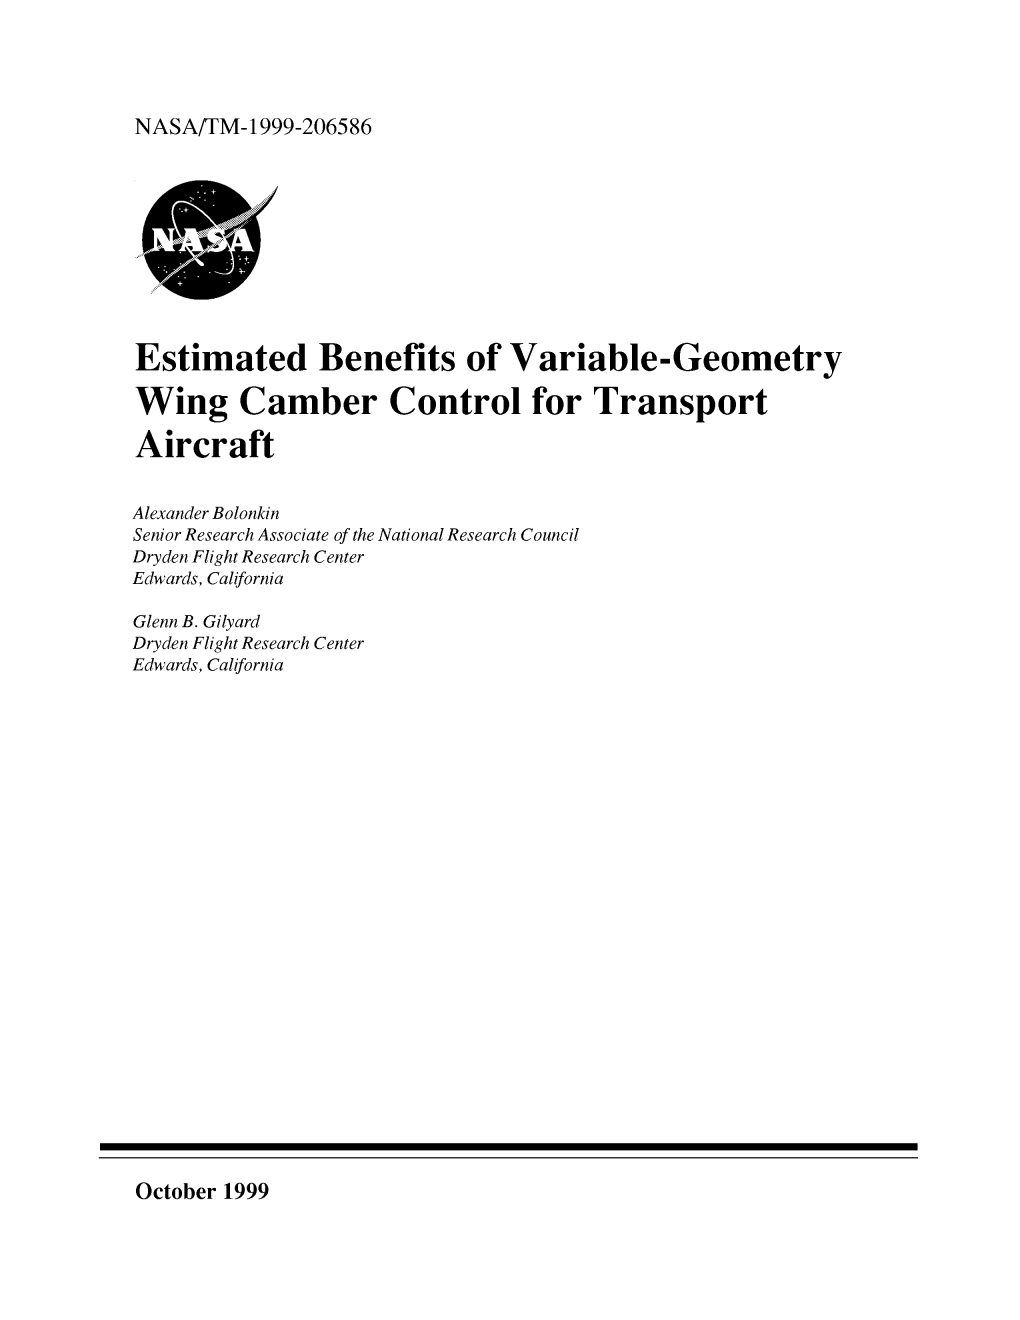 Estimated Benefits of Variable-Geometry Wing Camber Control for Transport Aircraft